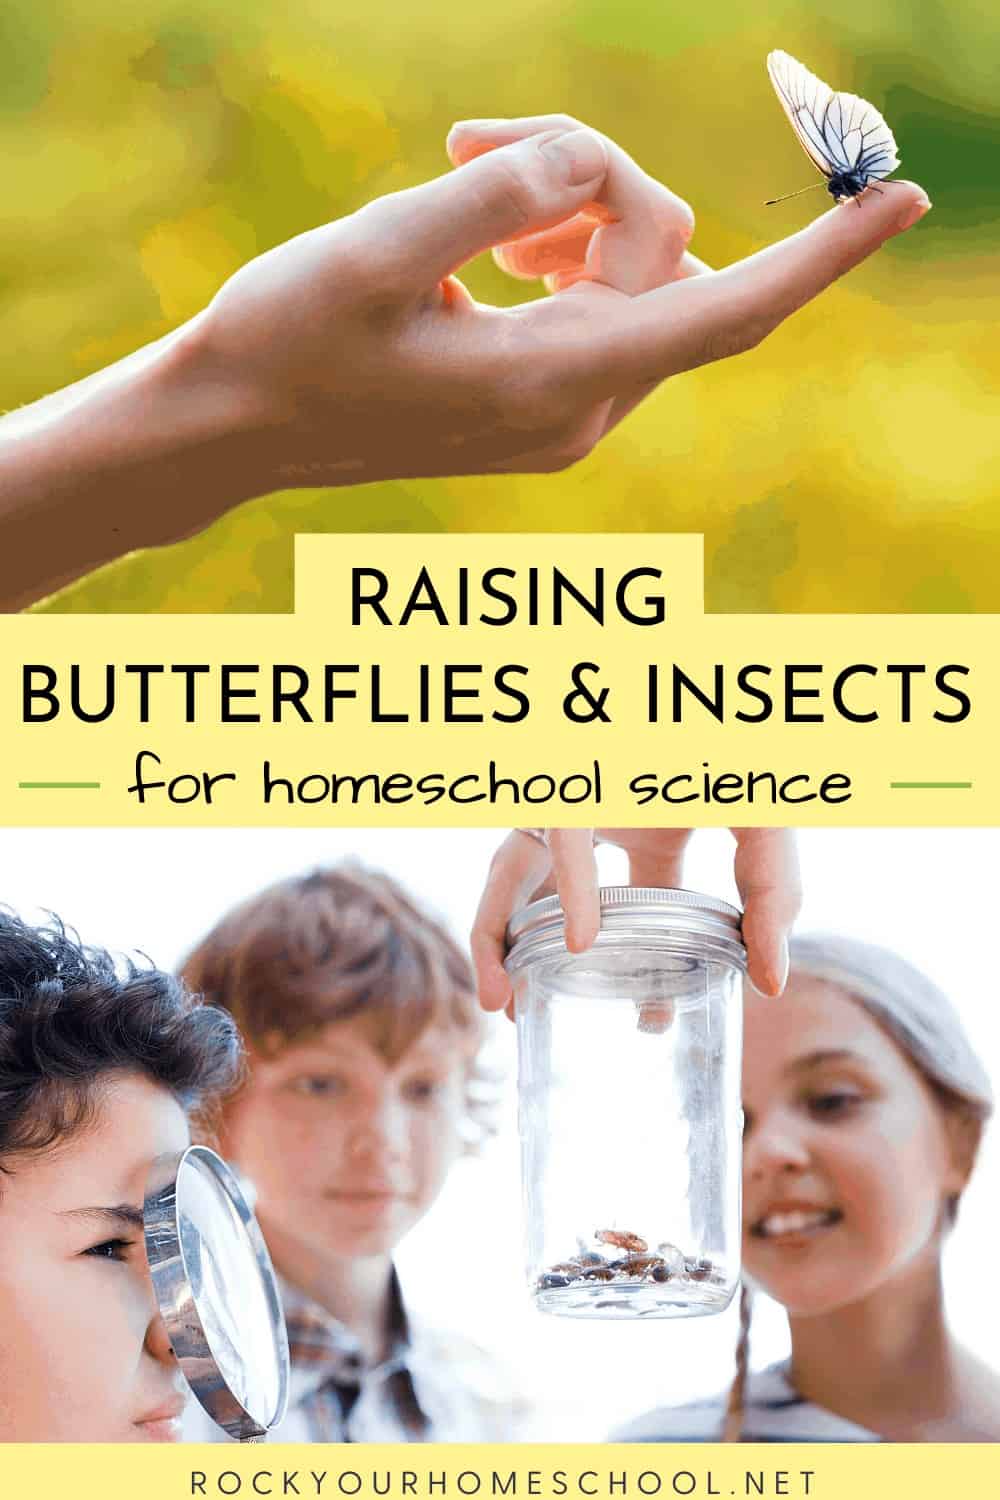 10 Top Tips for Raising Butterflies and Other Insects for Homeschool Science